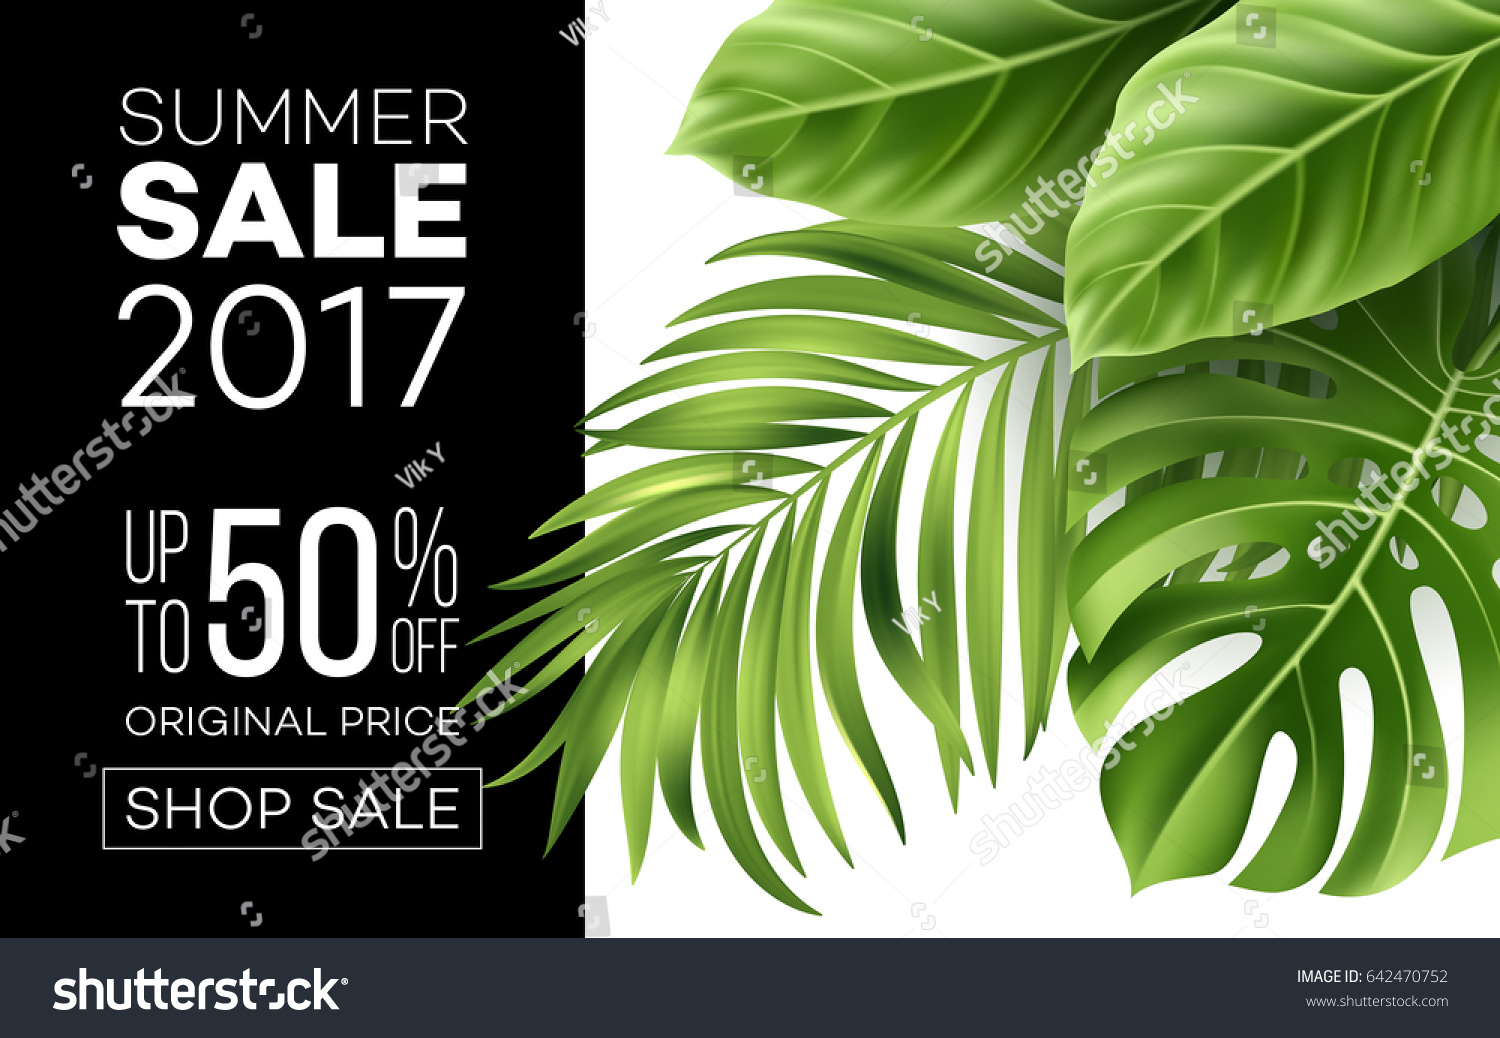 stock-vector-sale-banner-poster-with-palm-leaves-jungle-leaf-and-handwriting-lettering-floral-tropical-summer-642470752